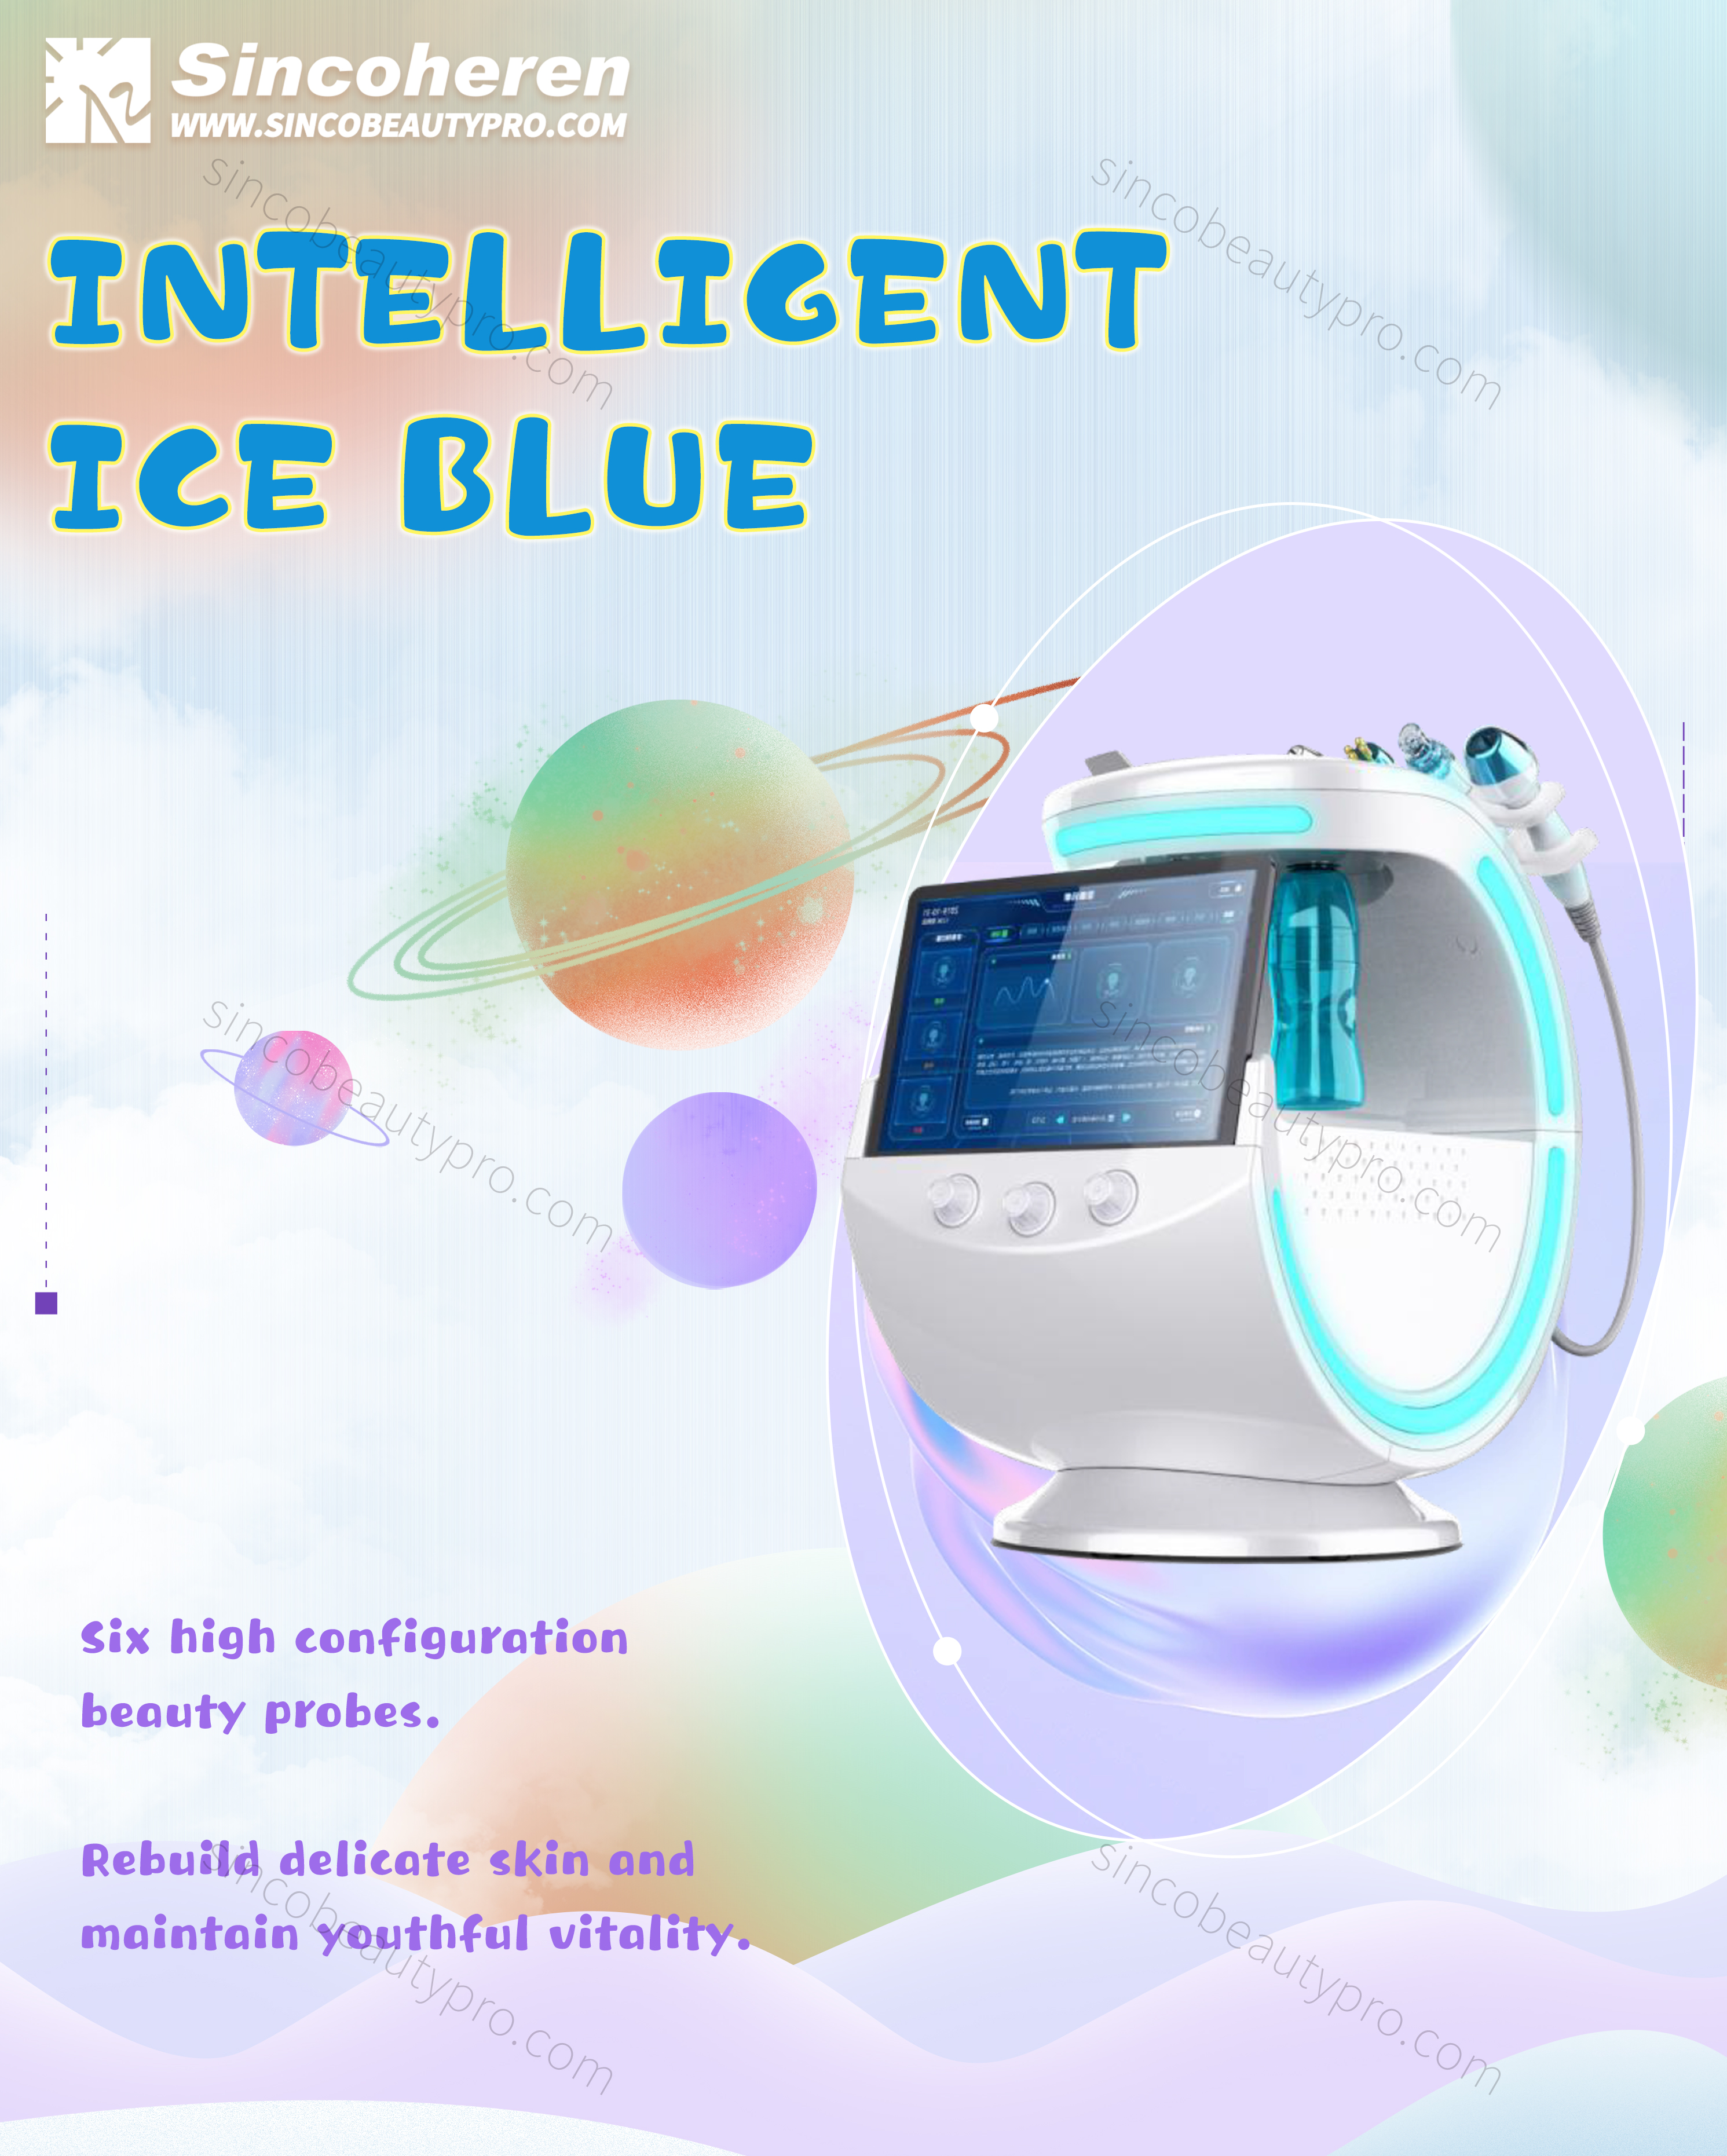 7in1 Portable Ang Intelligent Ice Blue Skin Management System Pro Release